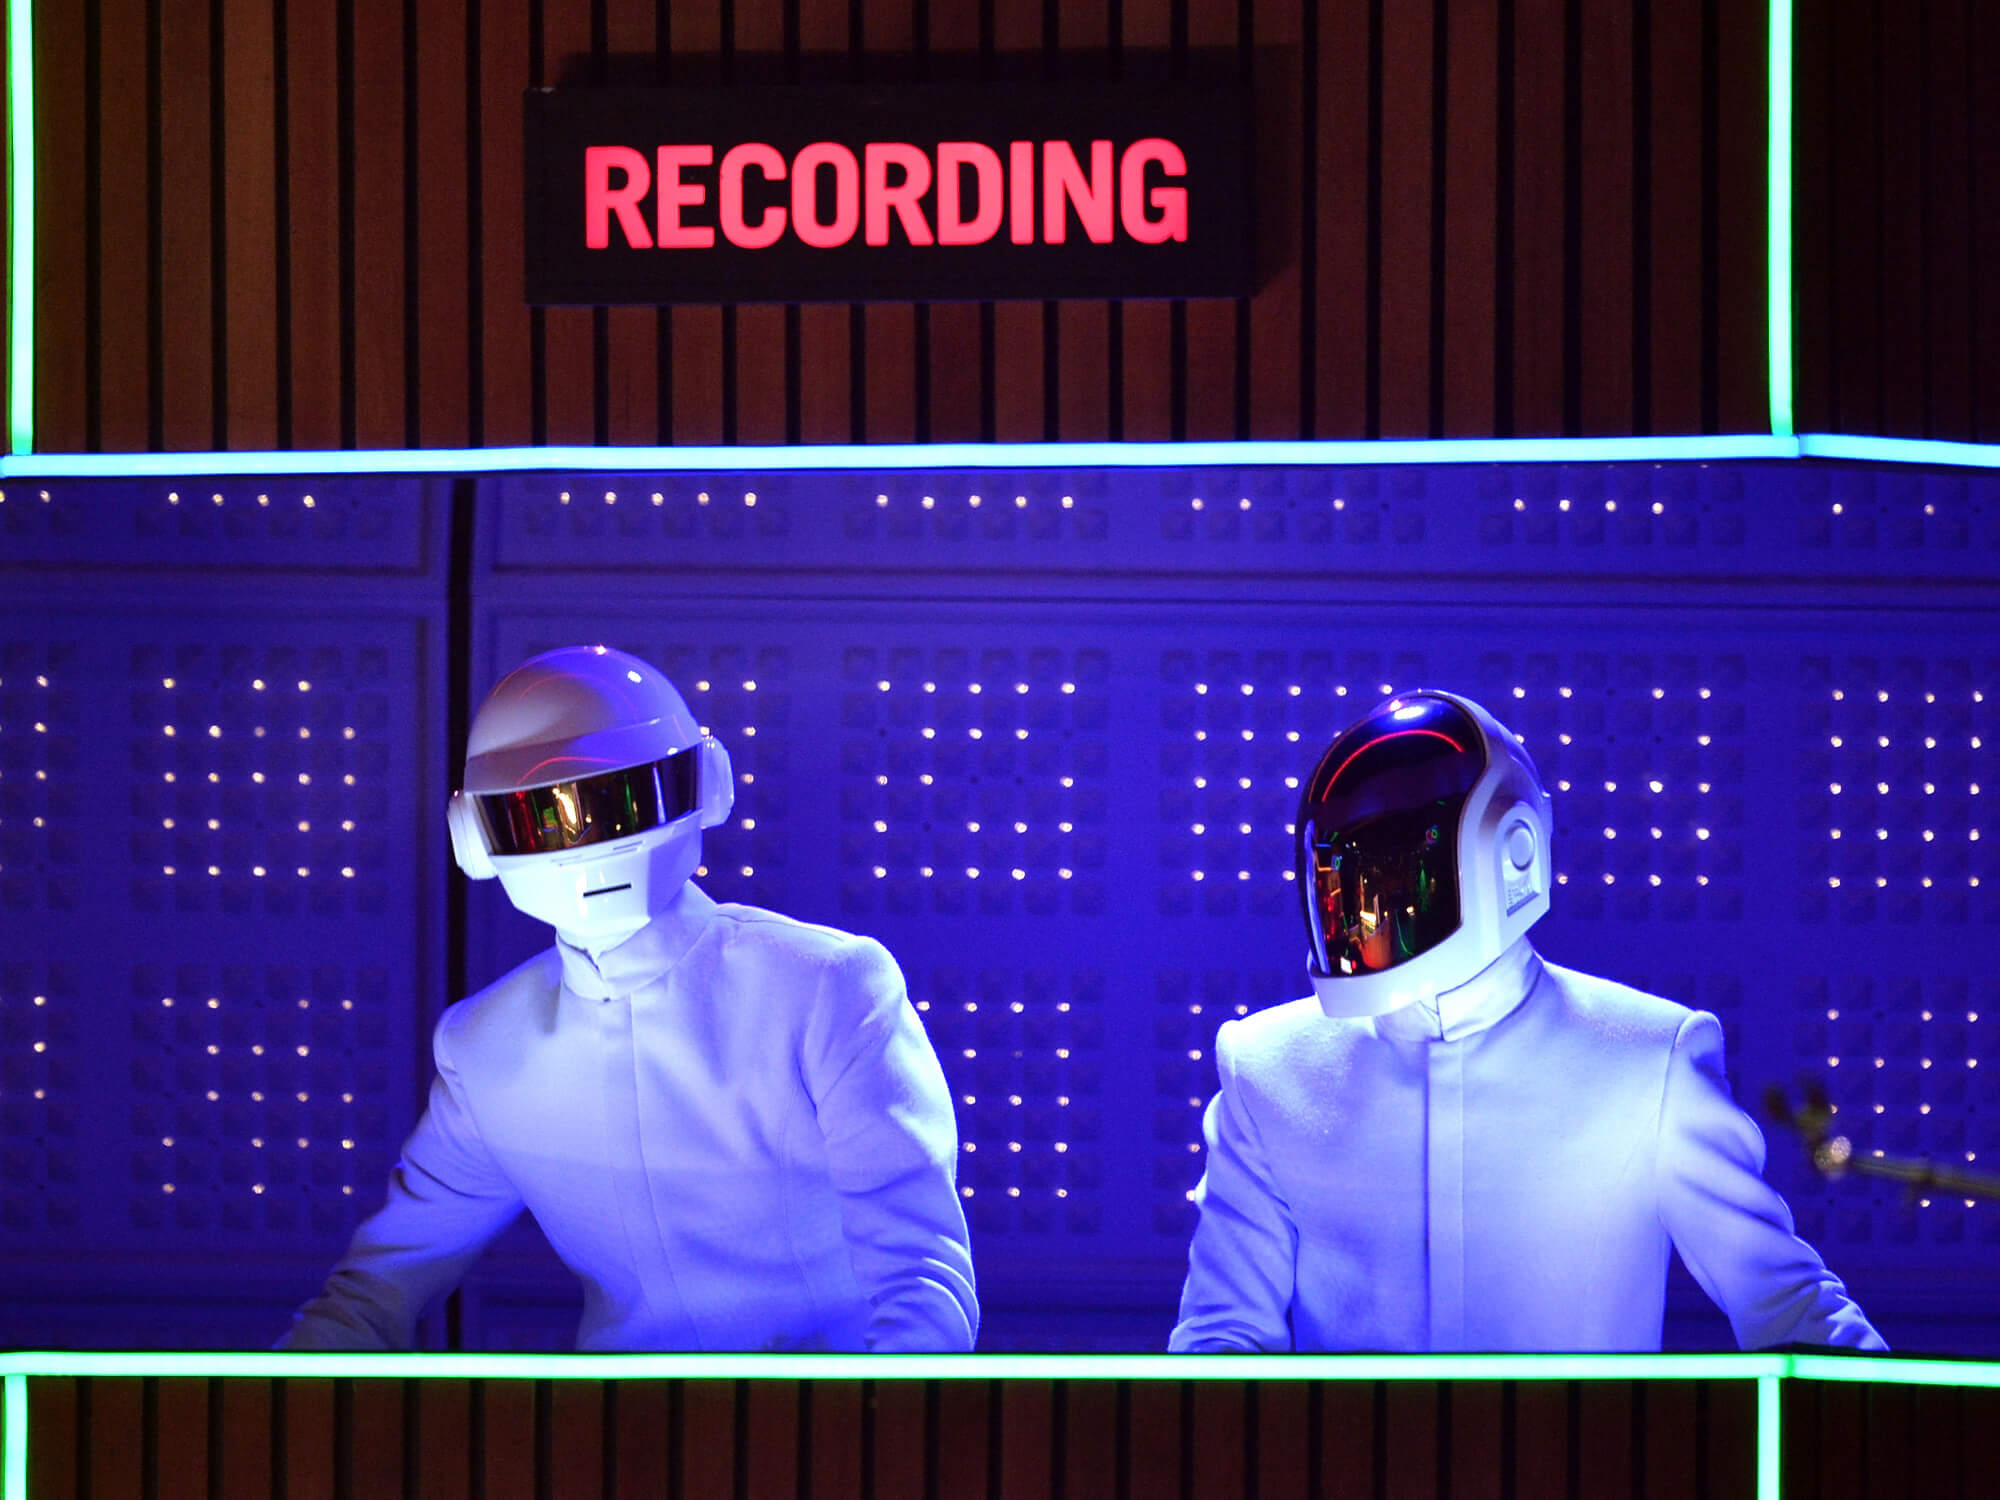 Daft Punk on stage, the word "recording" is illuminated in red above them. They are wearing all white suits and have their famous helmets on